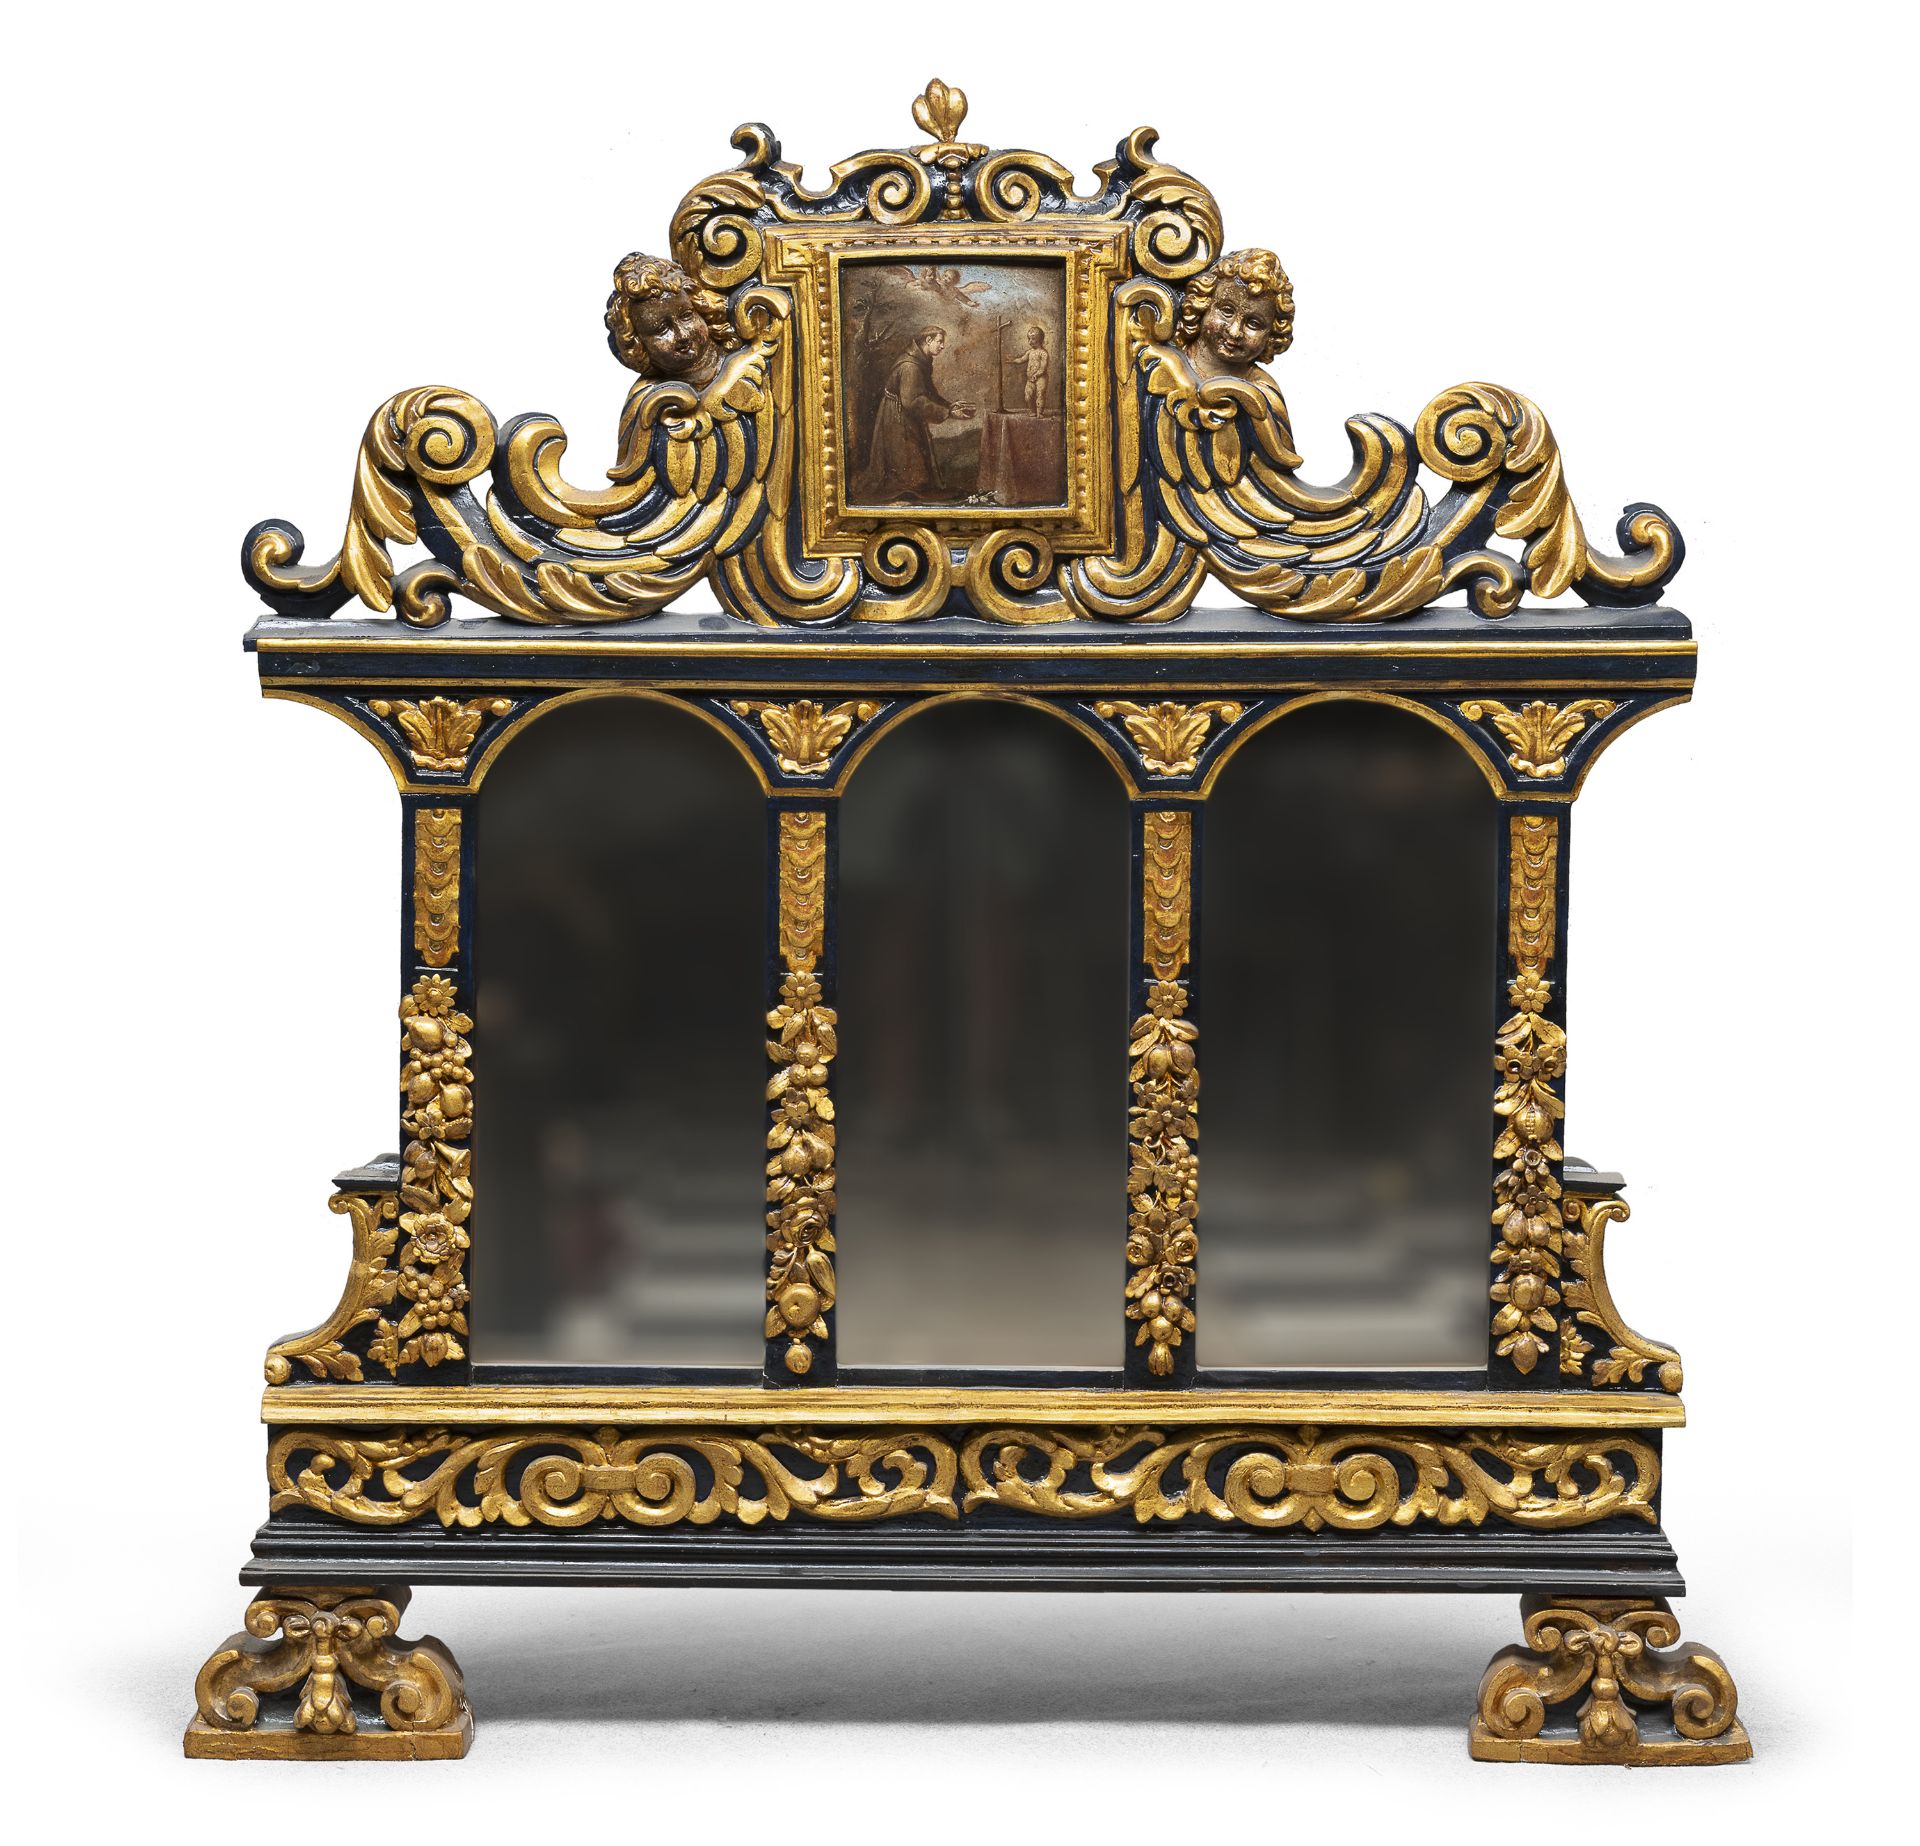 BIG MIRROR WITH PAINTING PROBABLY 18TH CENTURY NAPLES